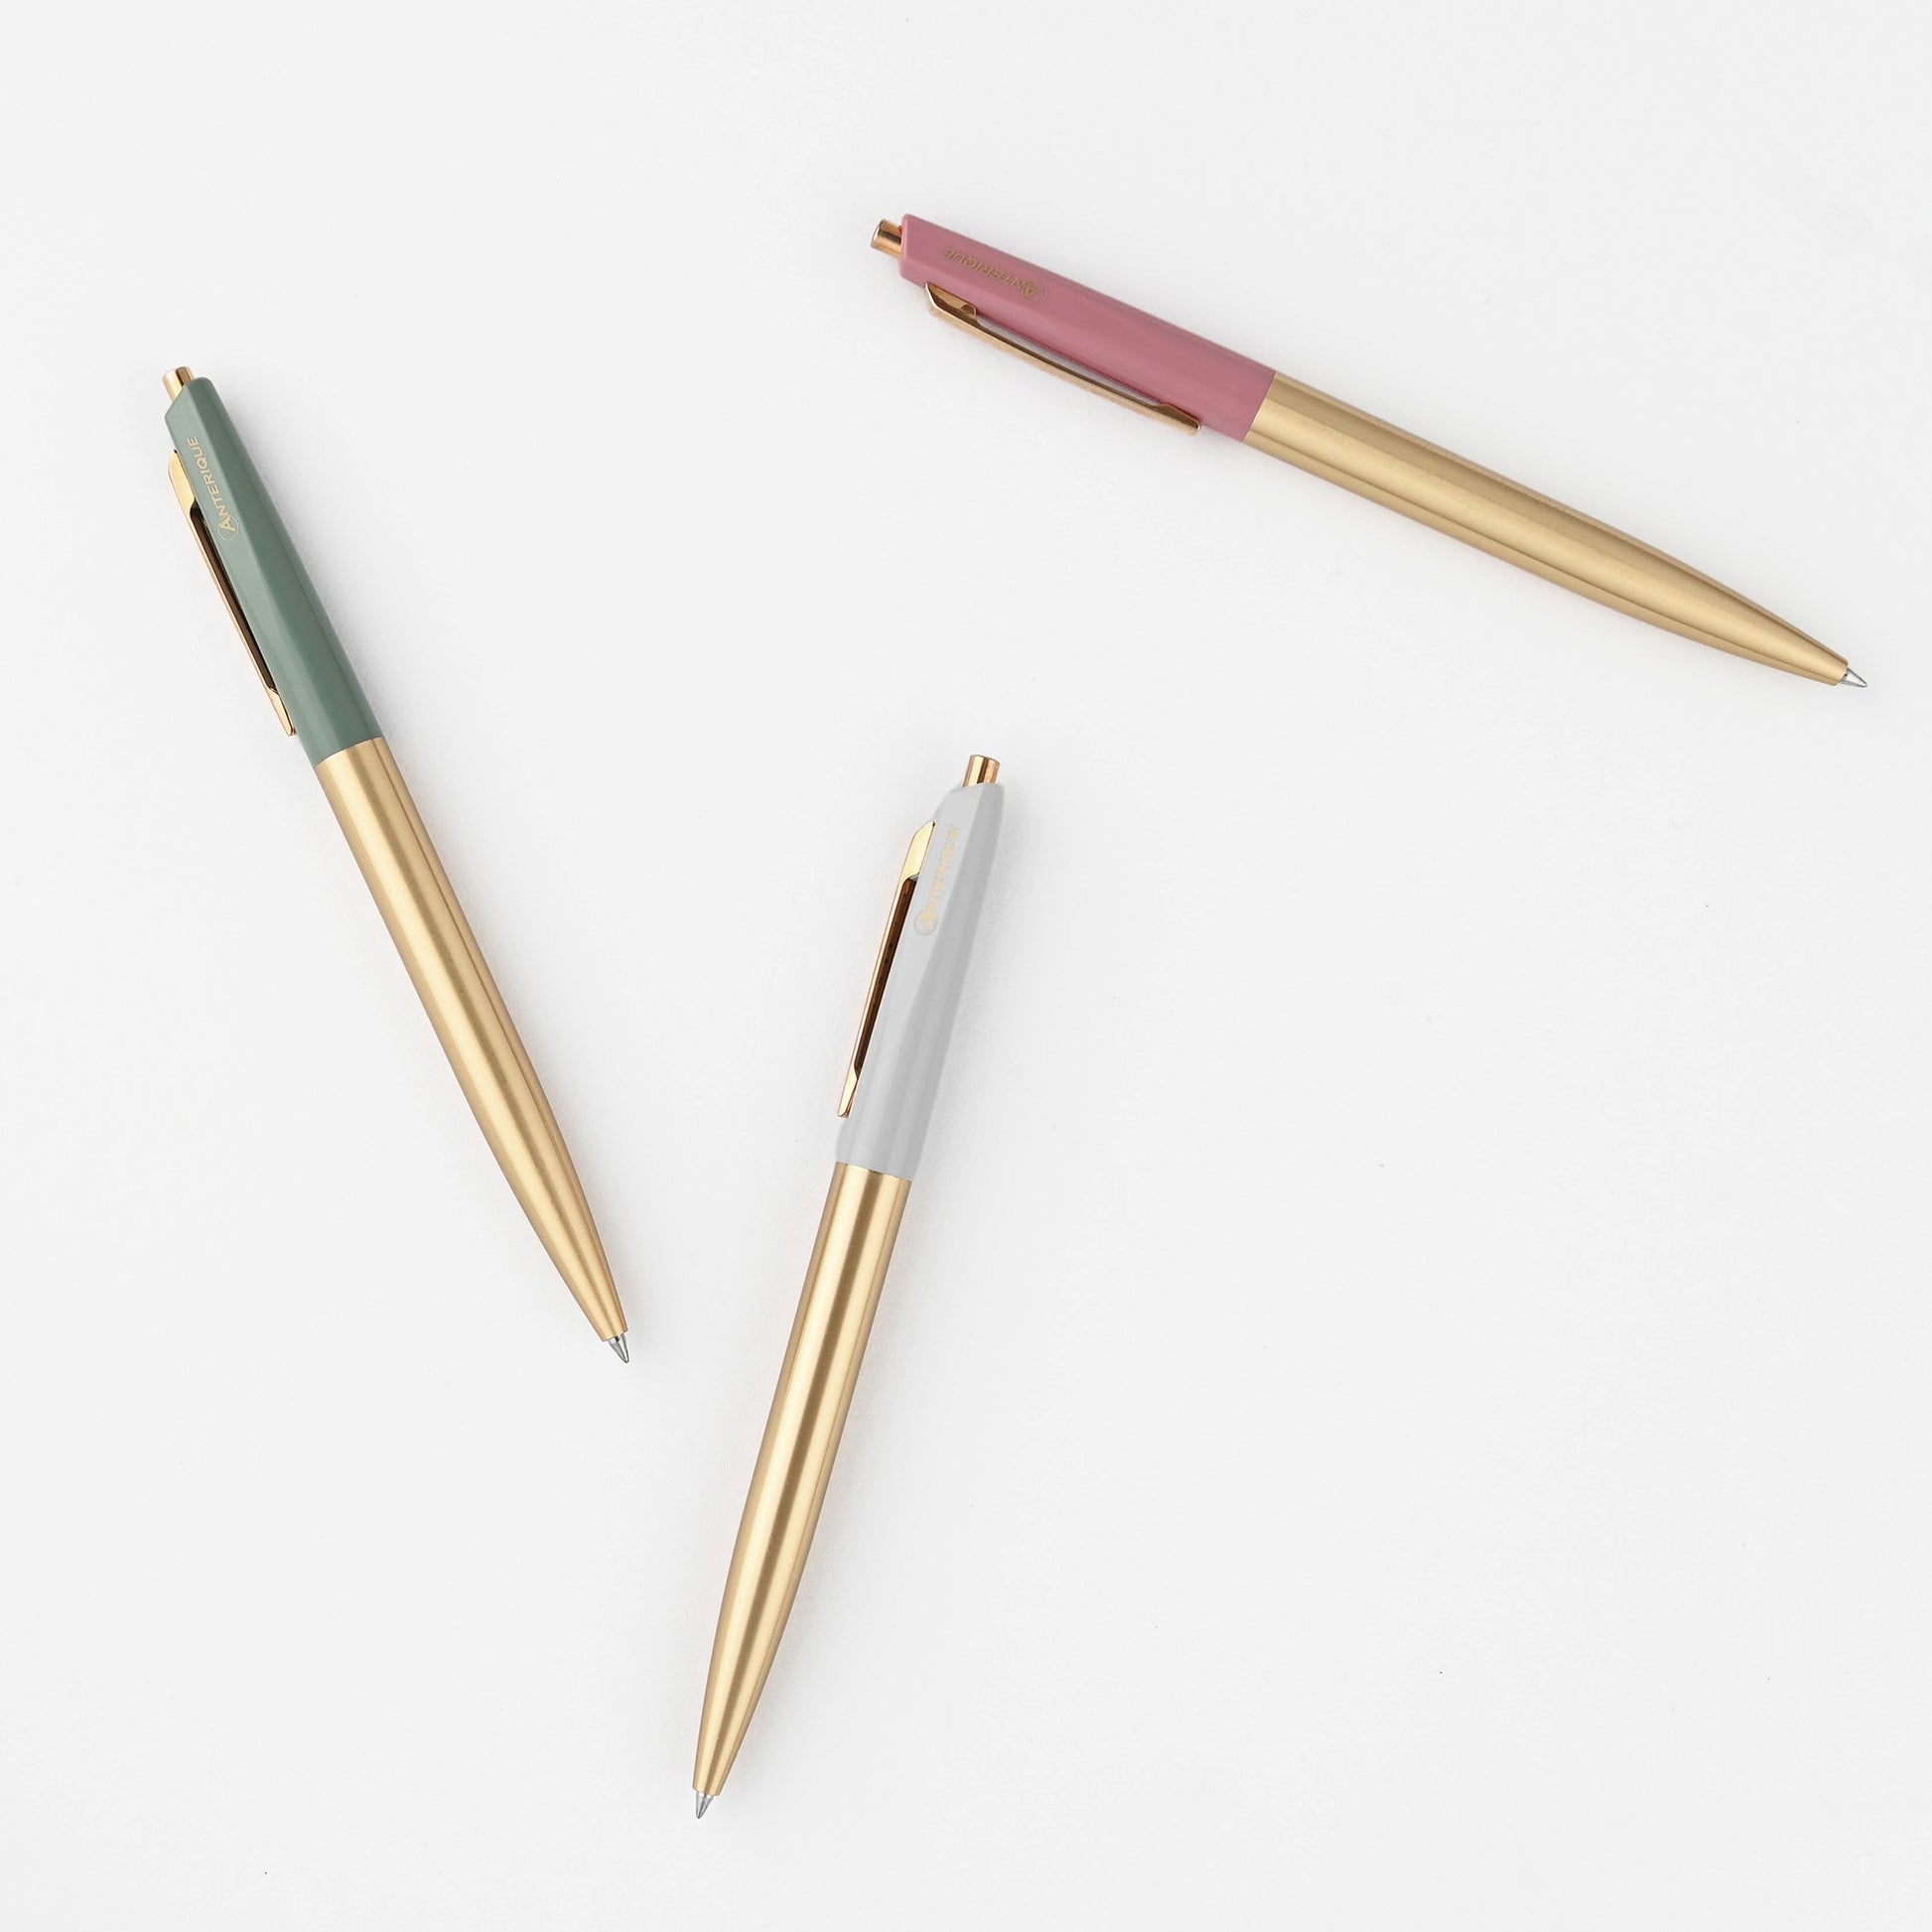 Anterique Ballpoint Pen Brass Edition | Sage Green, Pearl Grey Or Brick Red 